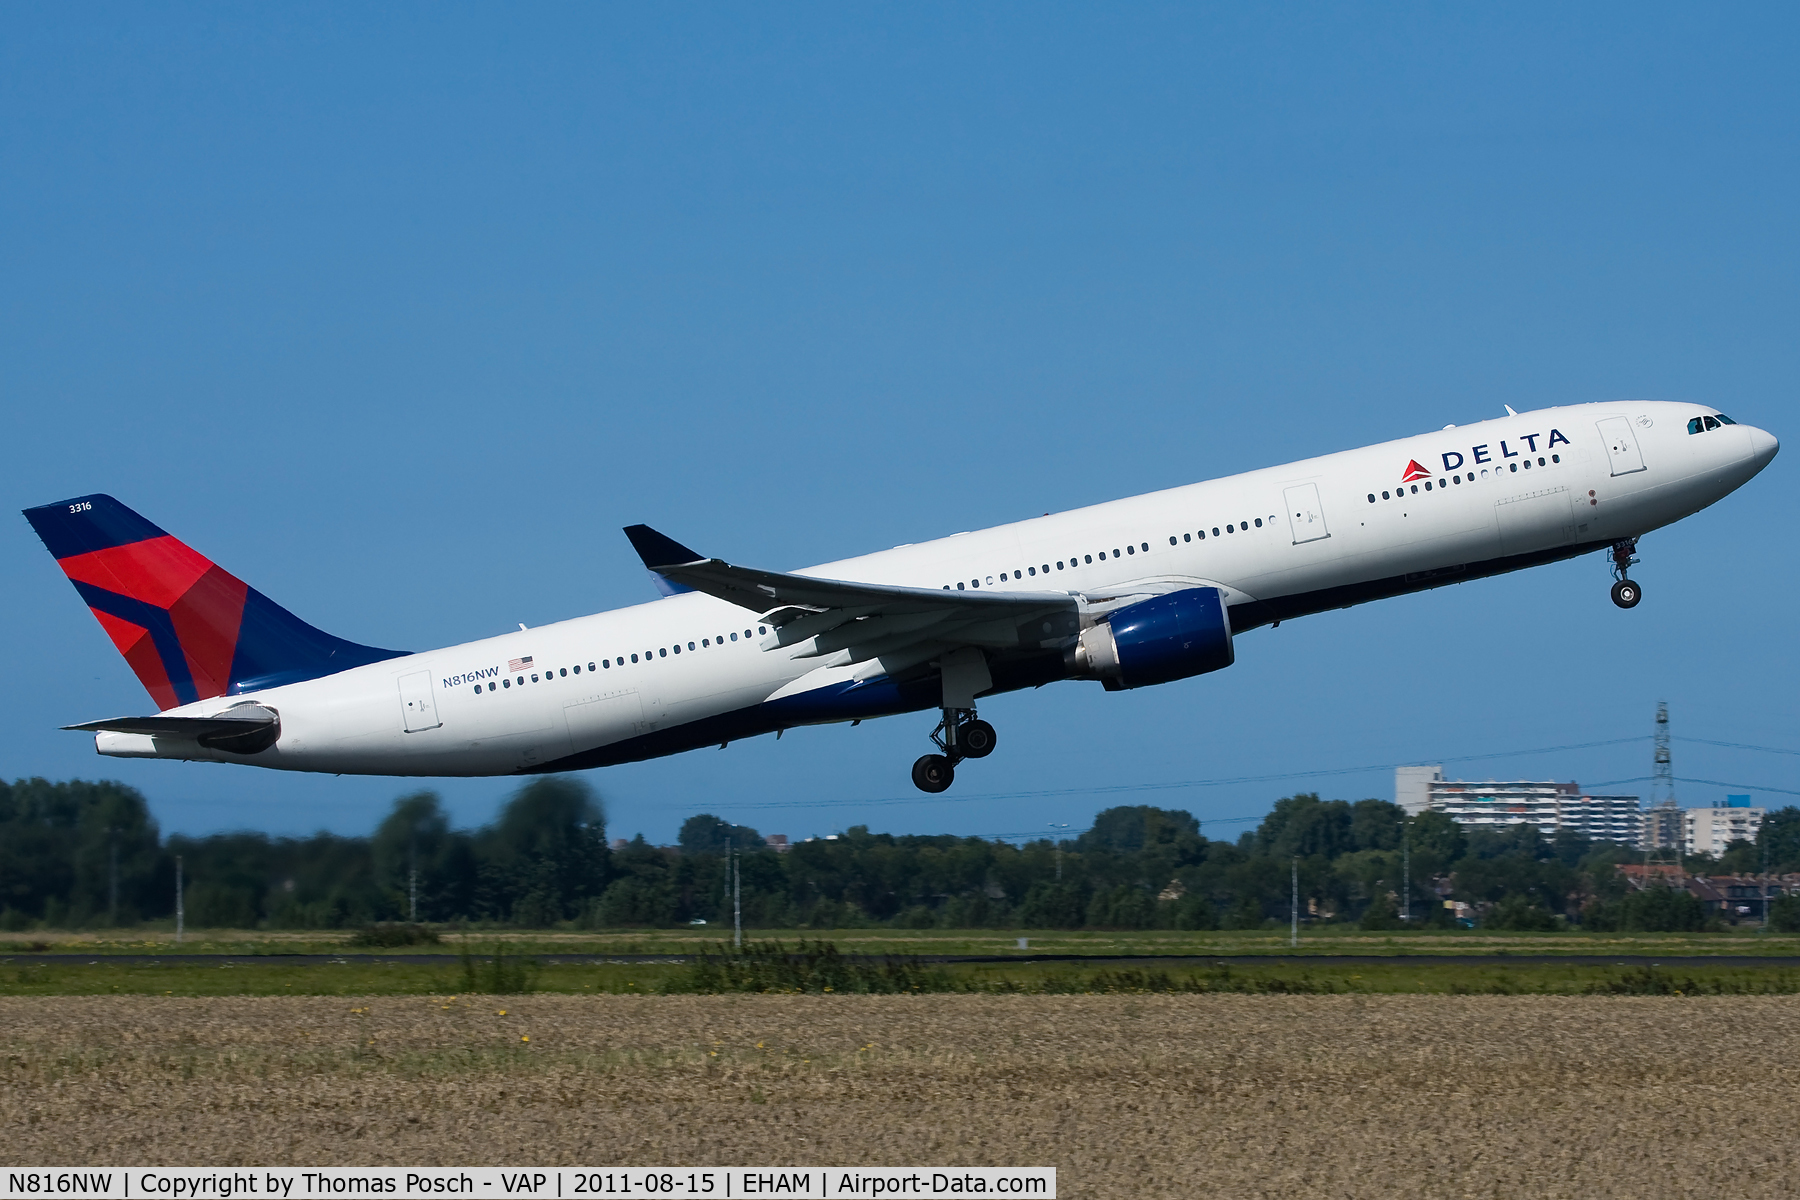 N816NW, 2007 Airbus A330-323X C/N 0827, Delta Airlines